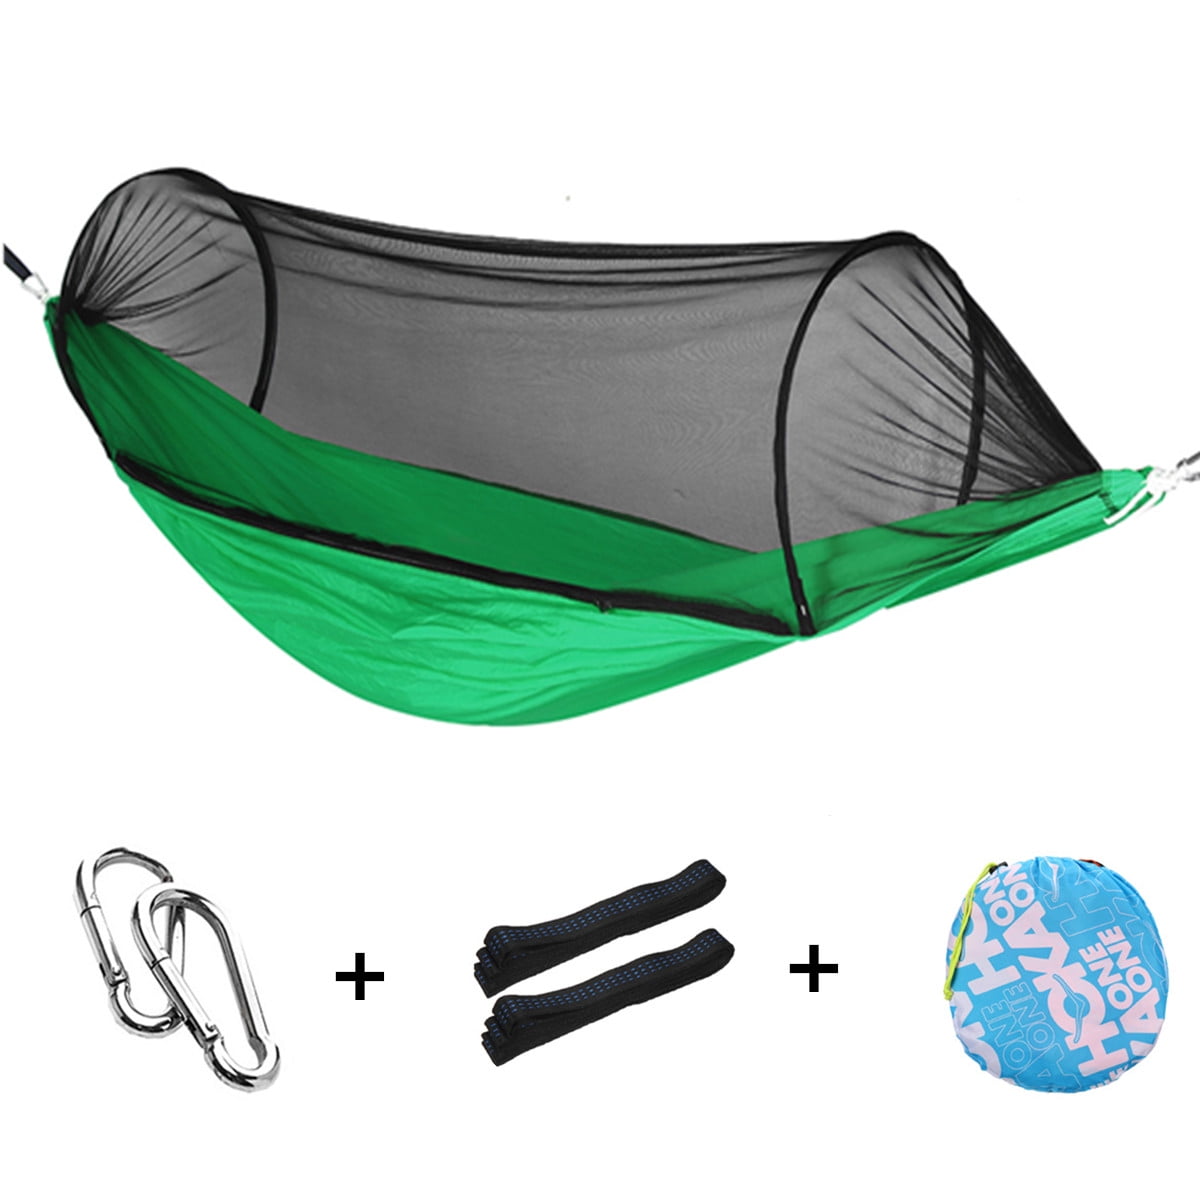 Portable Folding Hammock Chair Camping Picnic Outdoor Ozark Trail Padded Seatk92 for sale online